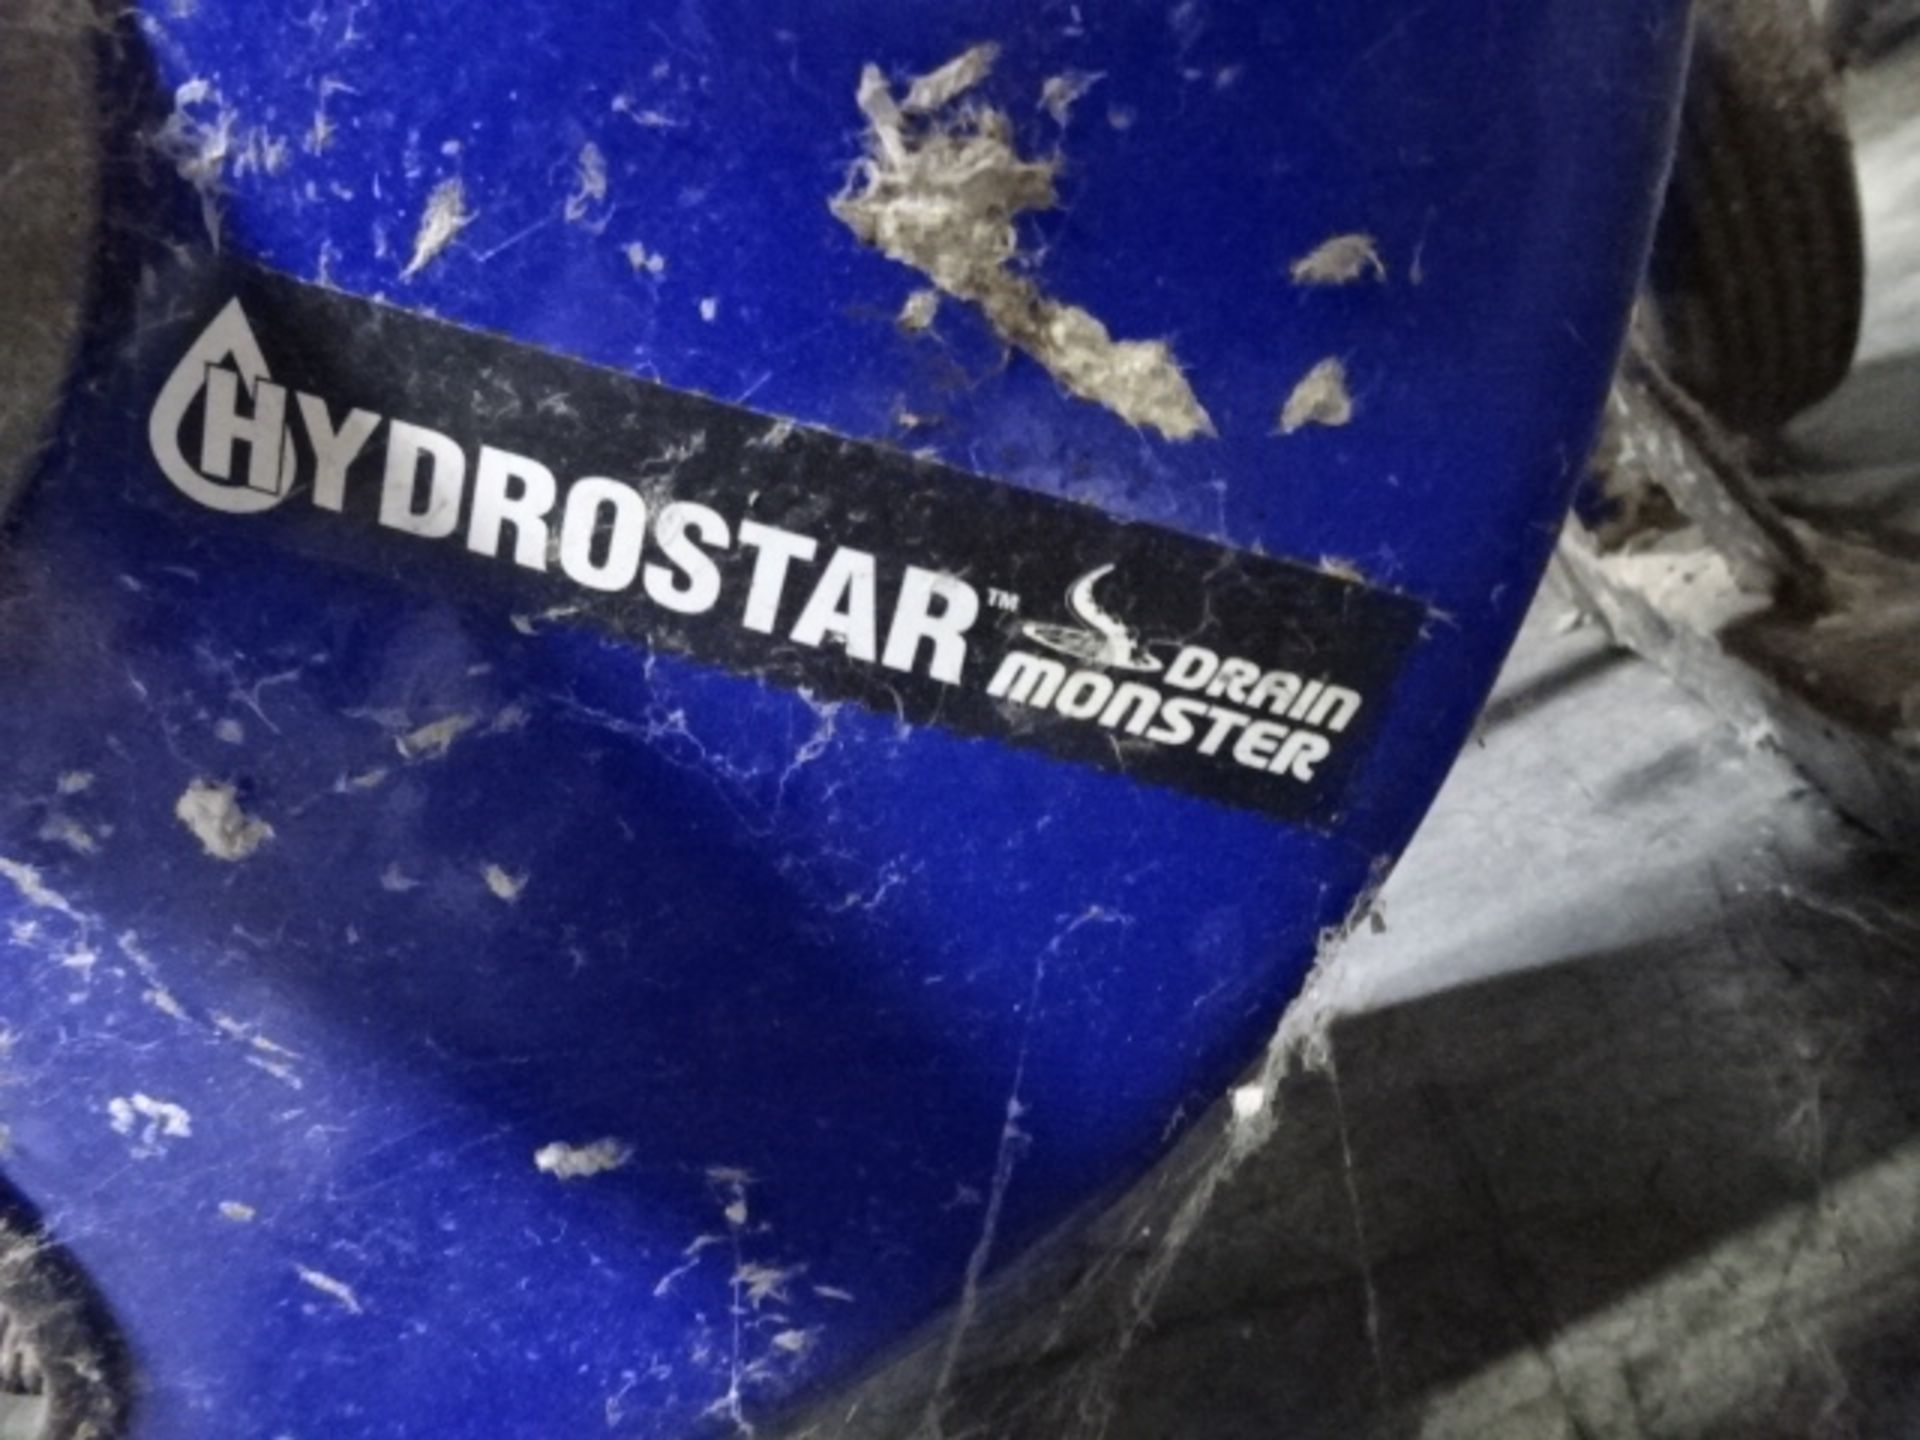 Hydrostar Compact Electric Drain Cleaner - Image 2 of 3